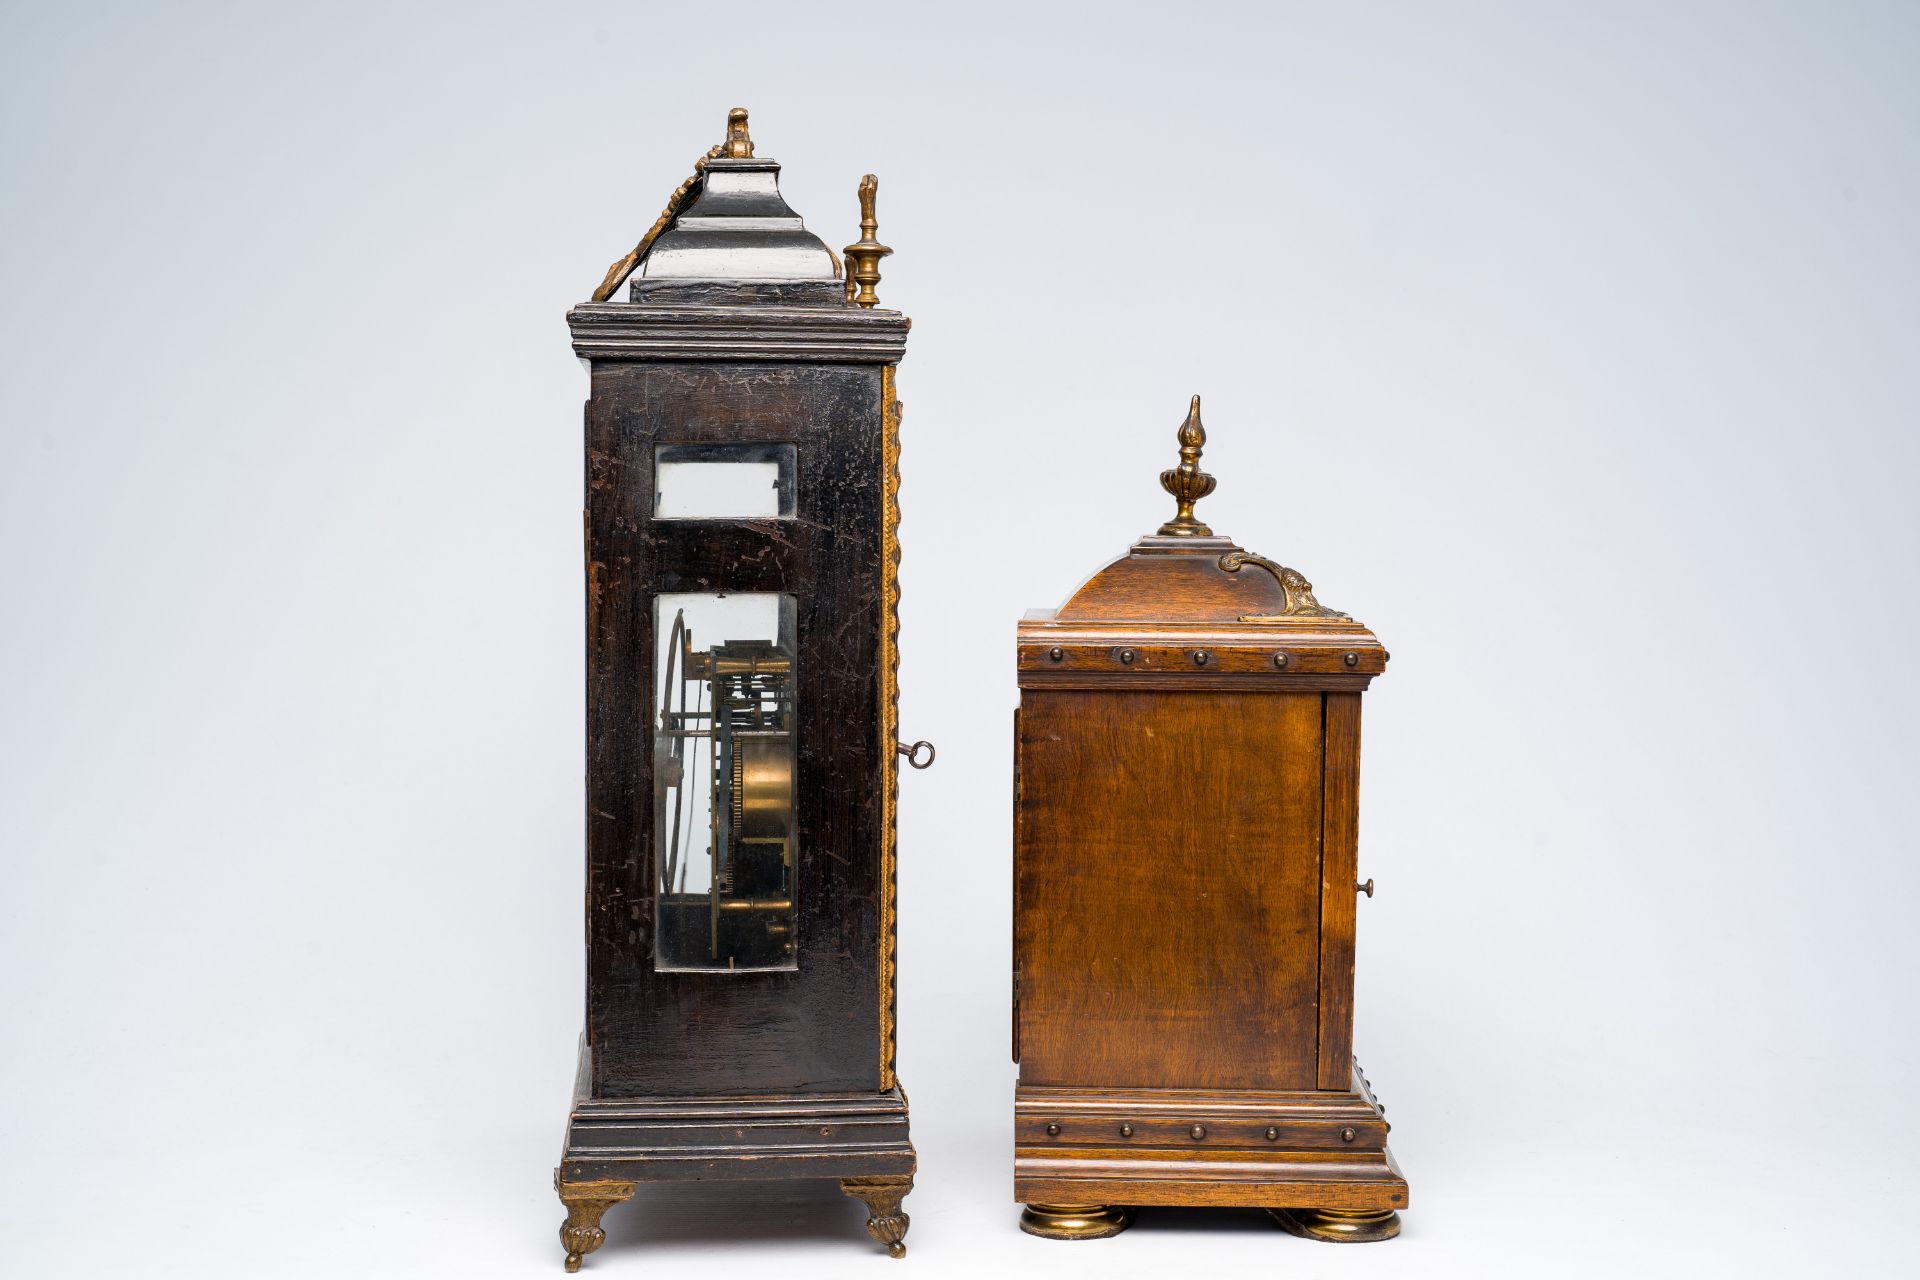 Two German bronze mounted table clocks in (ebonized) wood, 19th/20th C. - Image 5 of 7